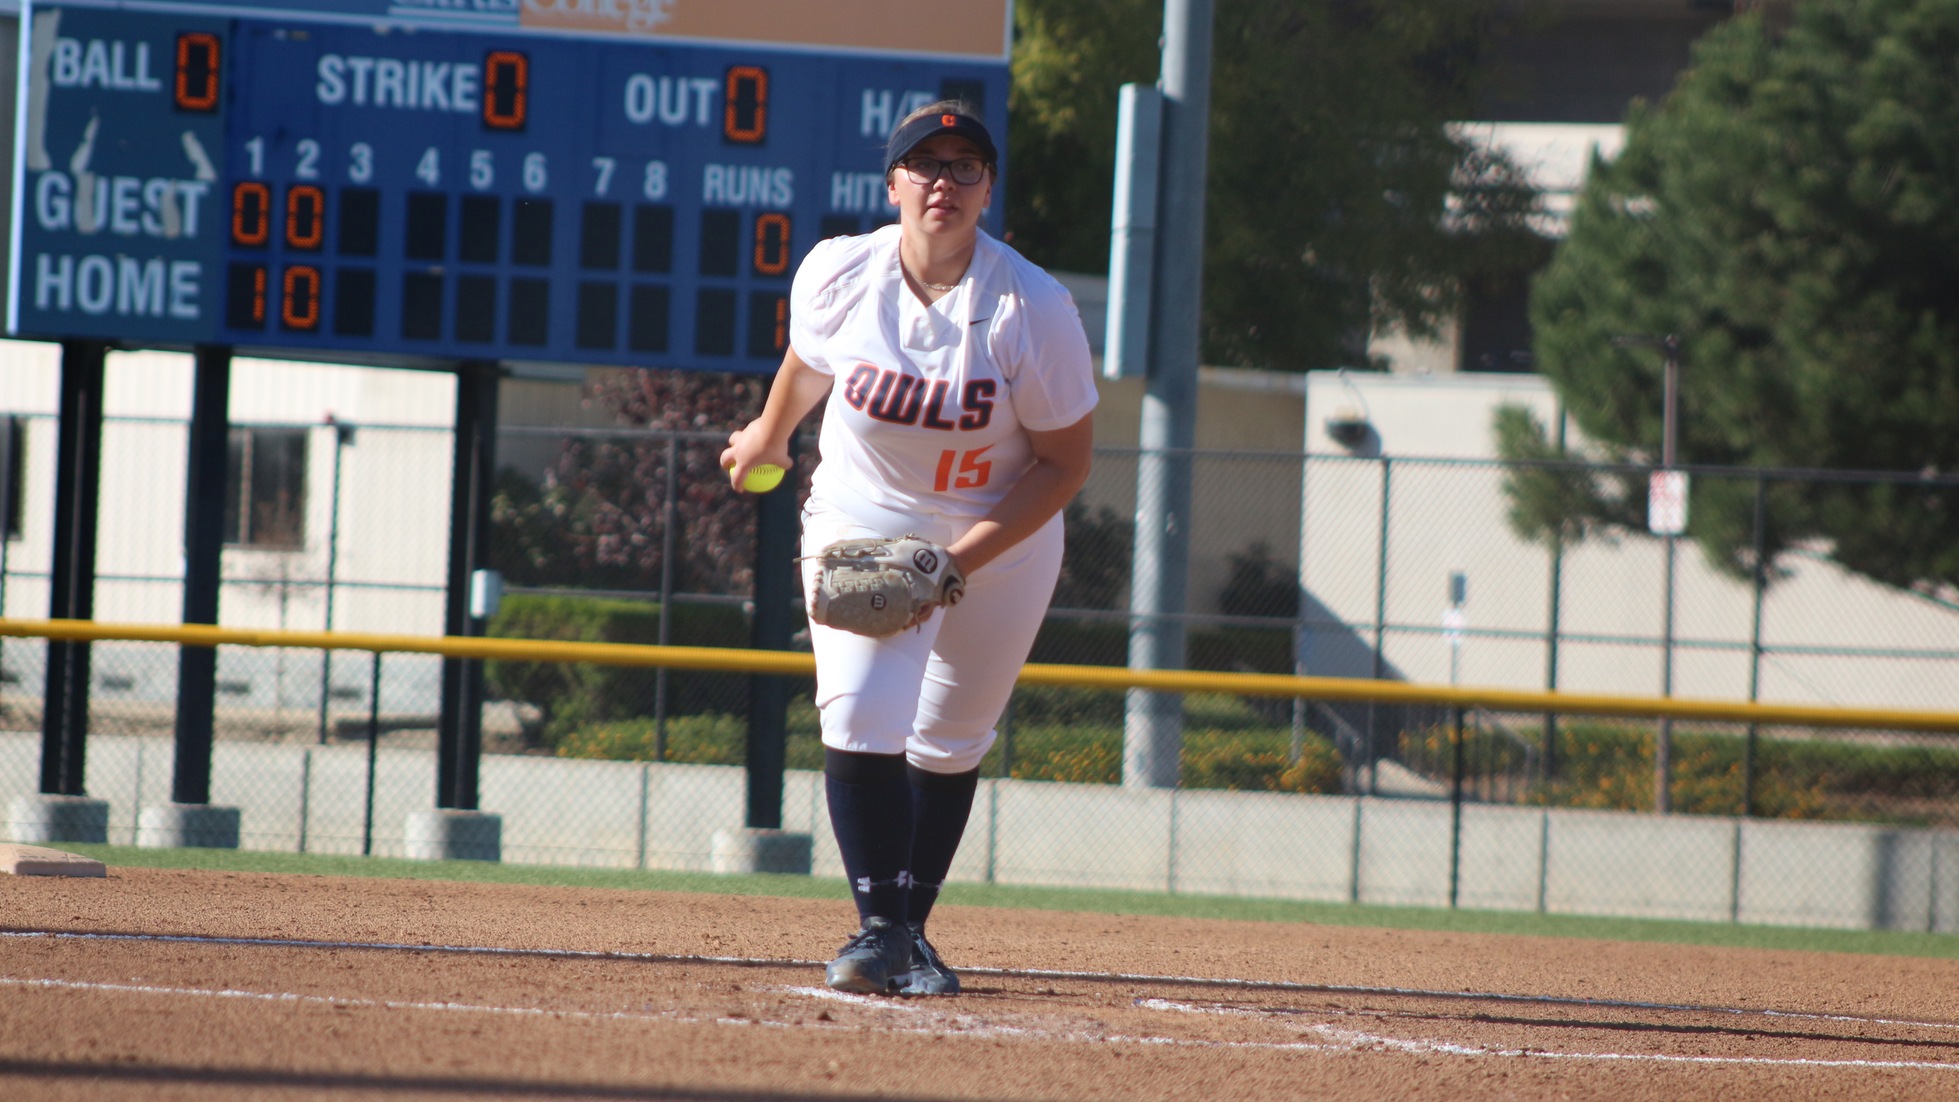 Briana Poteet pitched the whole game, striking out eight batters and not giving up a run for the win. Photo by: Brianna Jara.